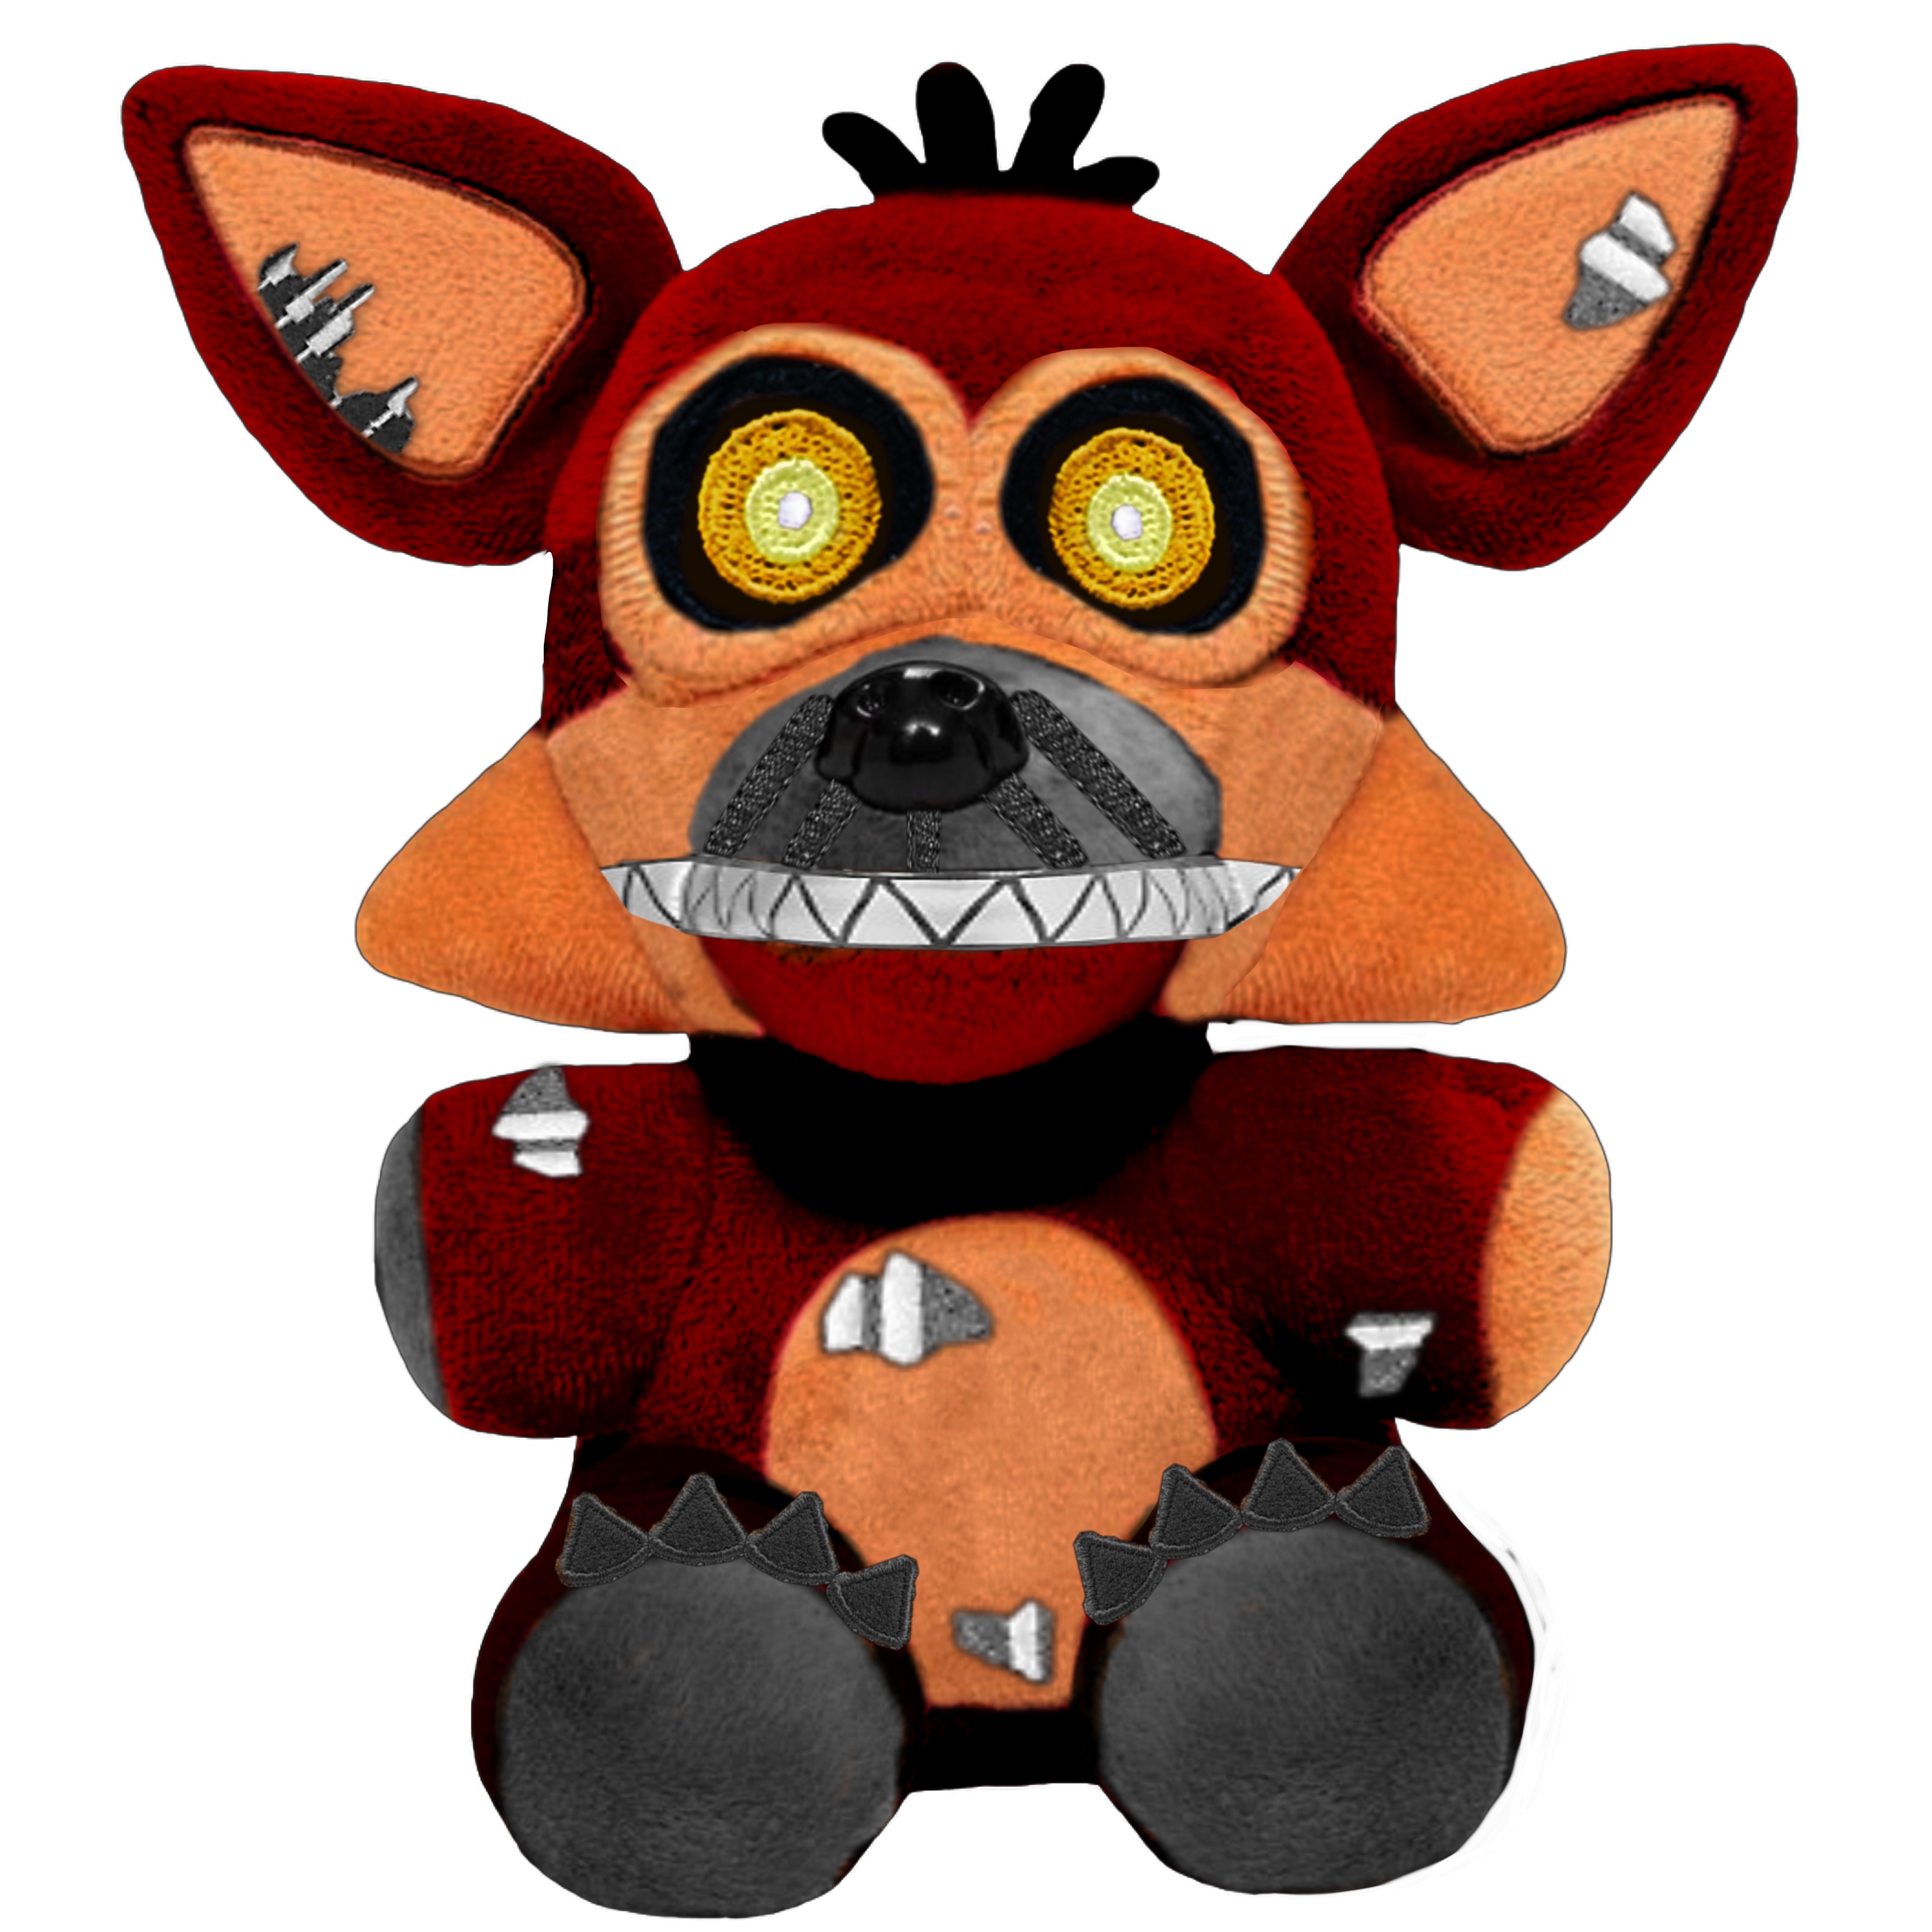 Withered Foxy full body v.2 by FNAFfan28 on DeviantArt